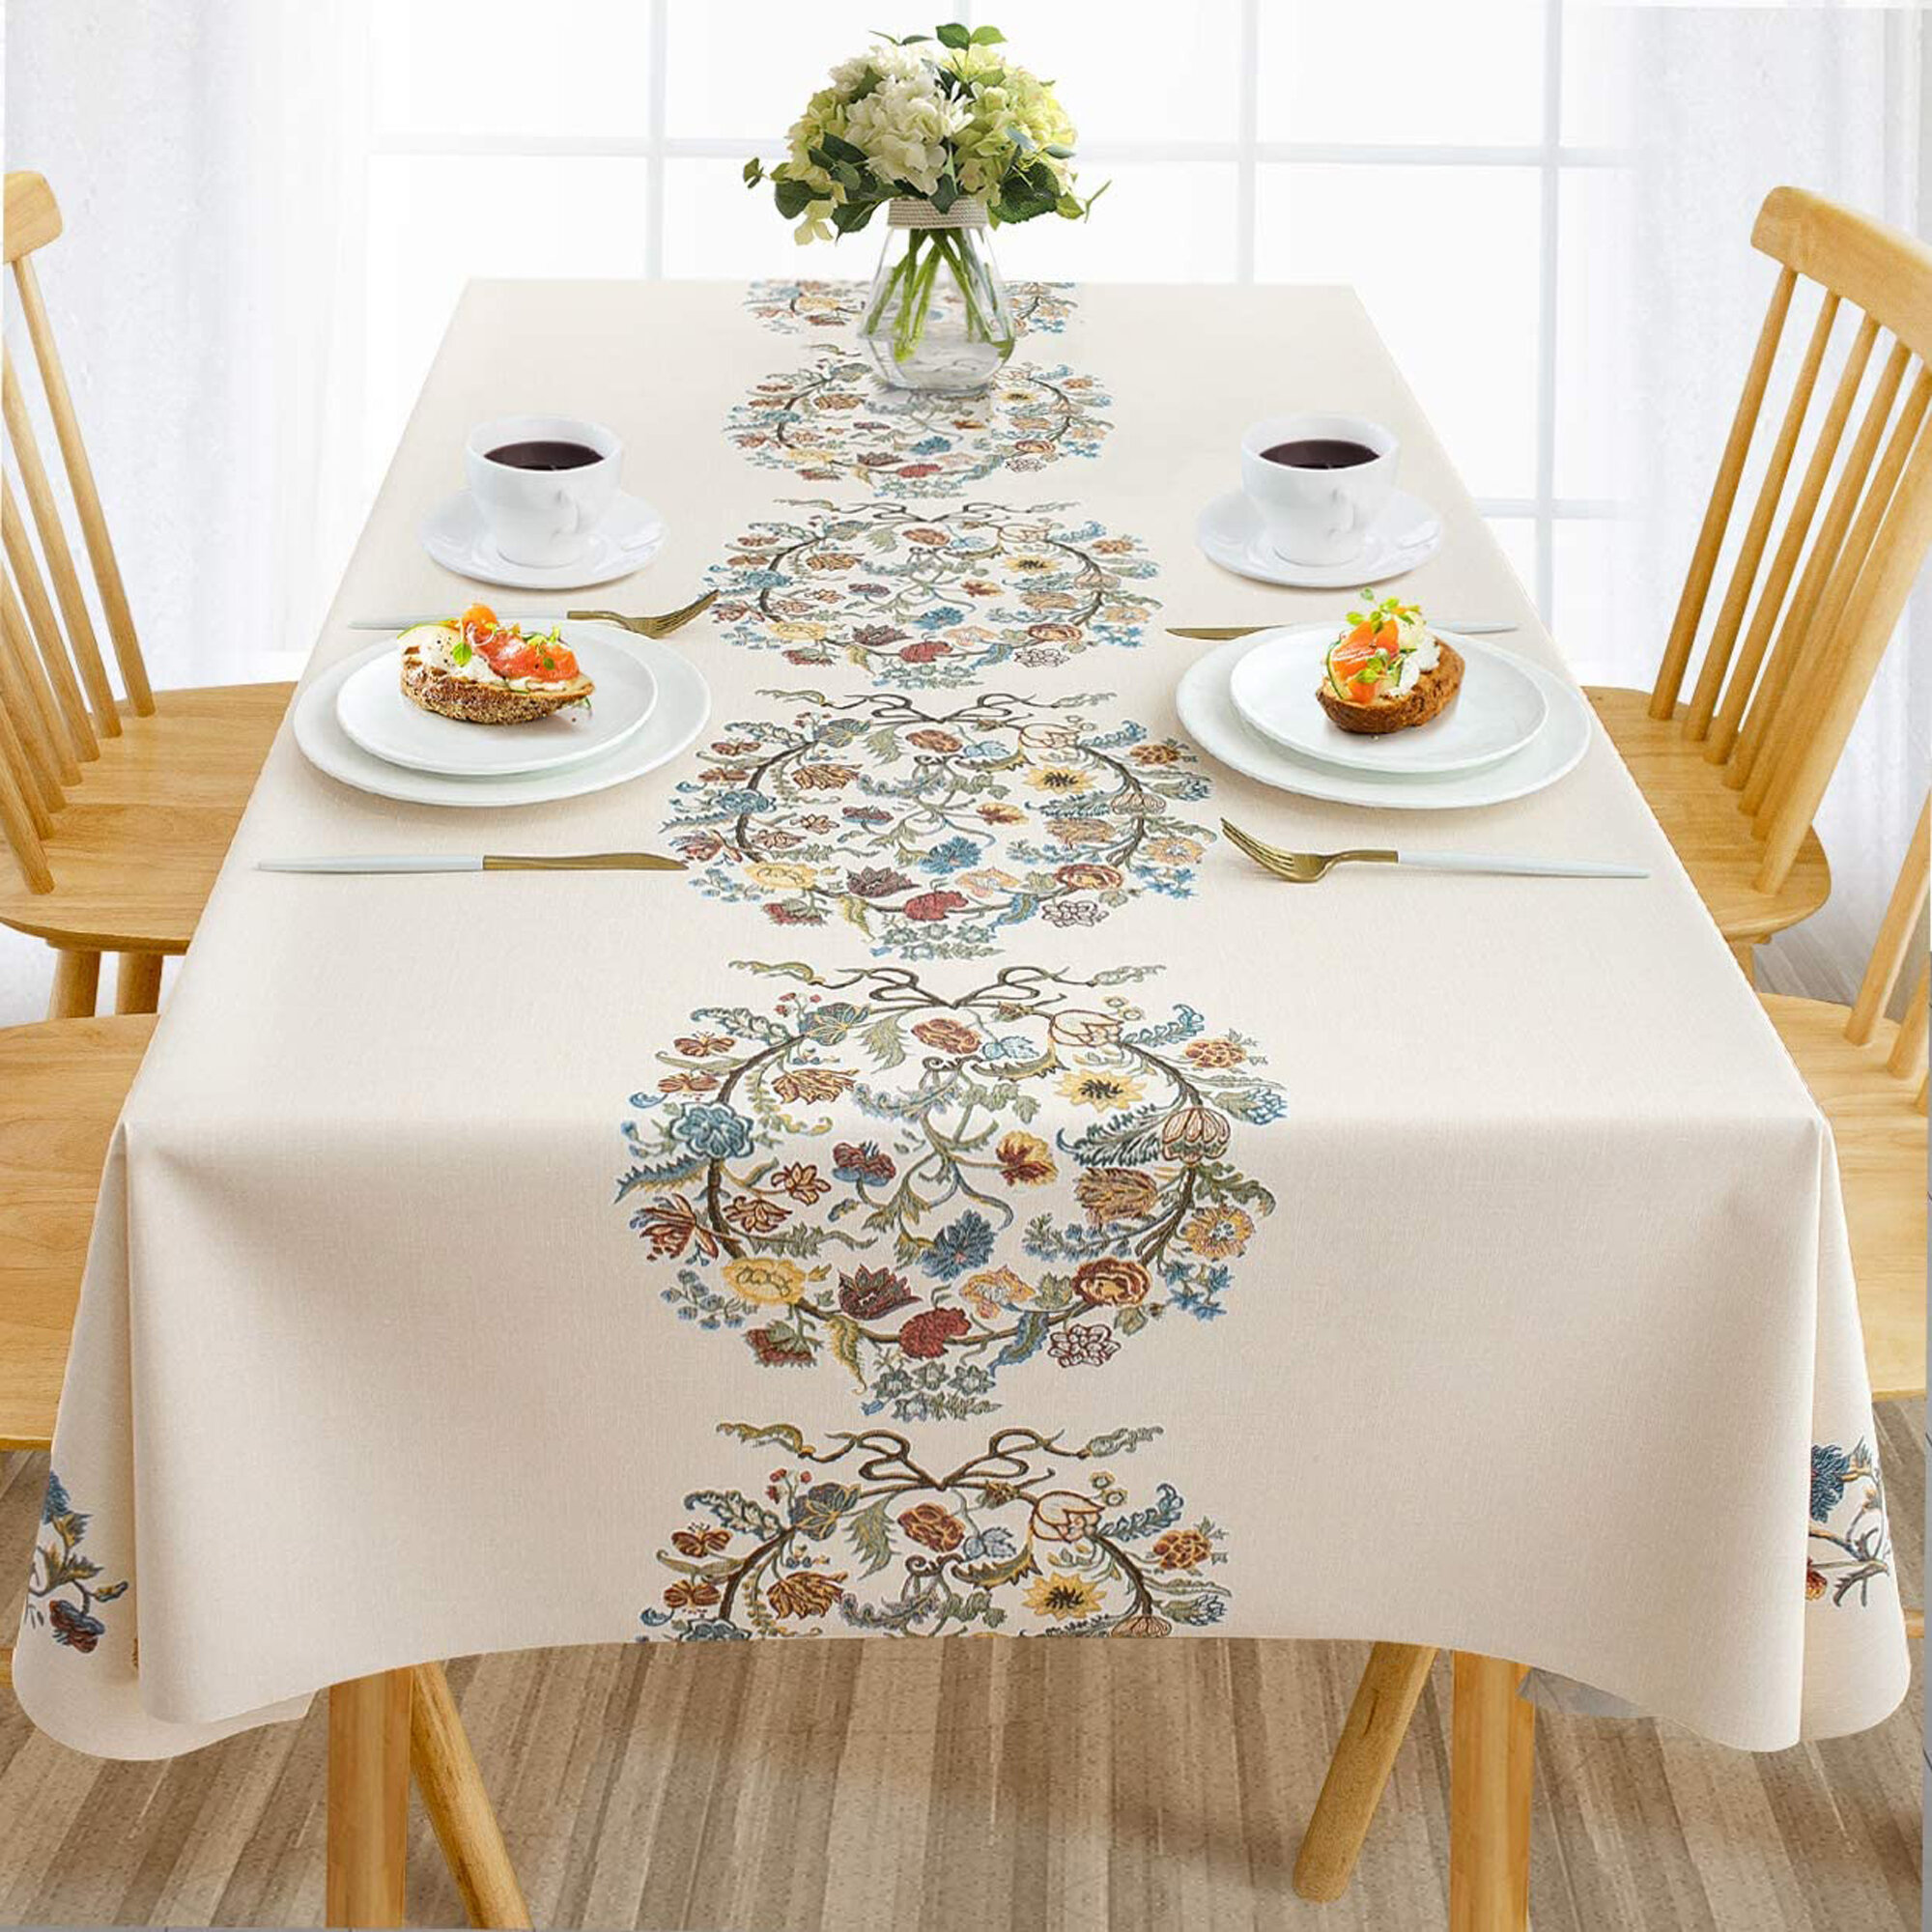 TABLECLOTH/TABLE RUNNER FOR YOUR HOME 11COLOURS AMAZING EMBROIDERED BIG FLOWERS 